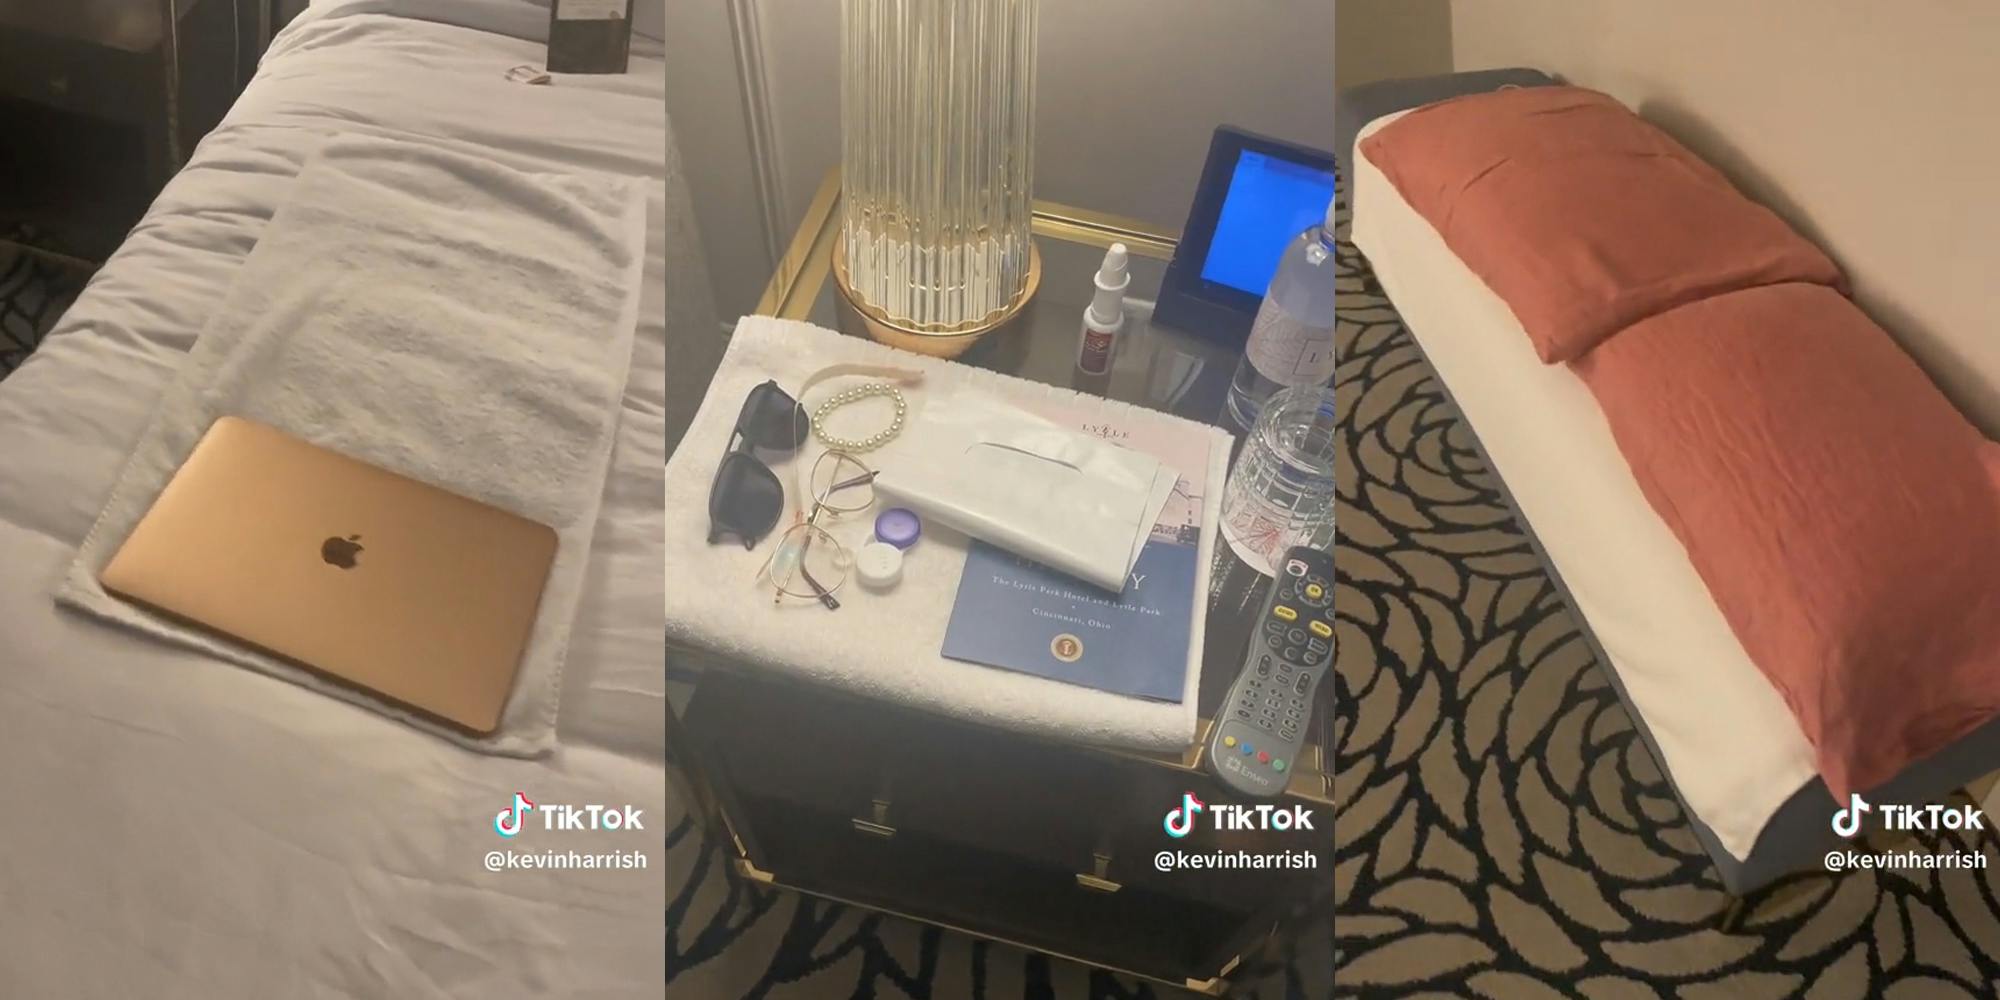 items placed on towels throughout hotel room